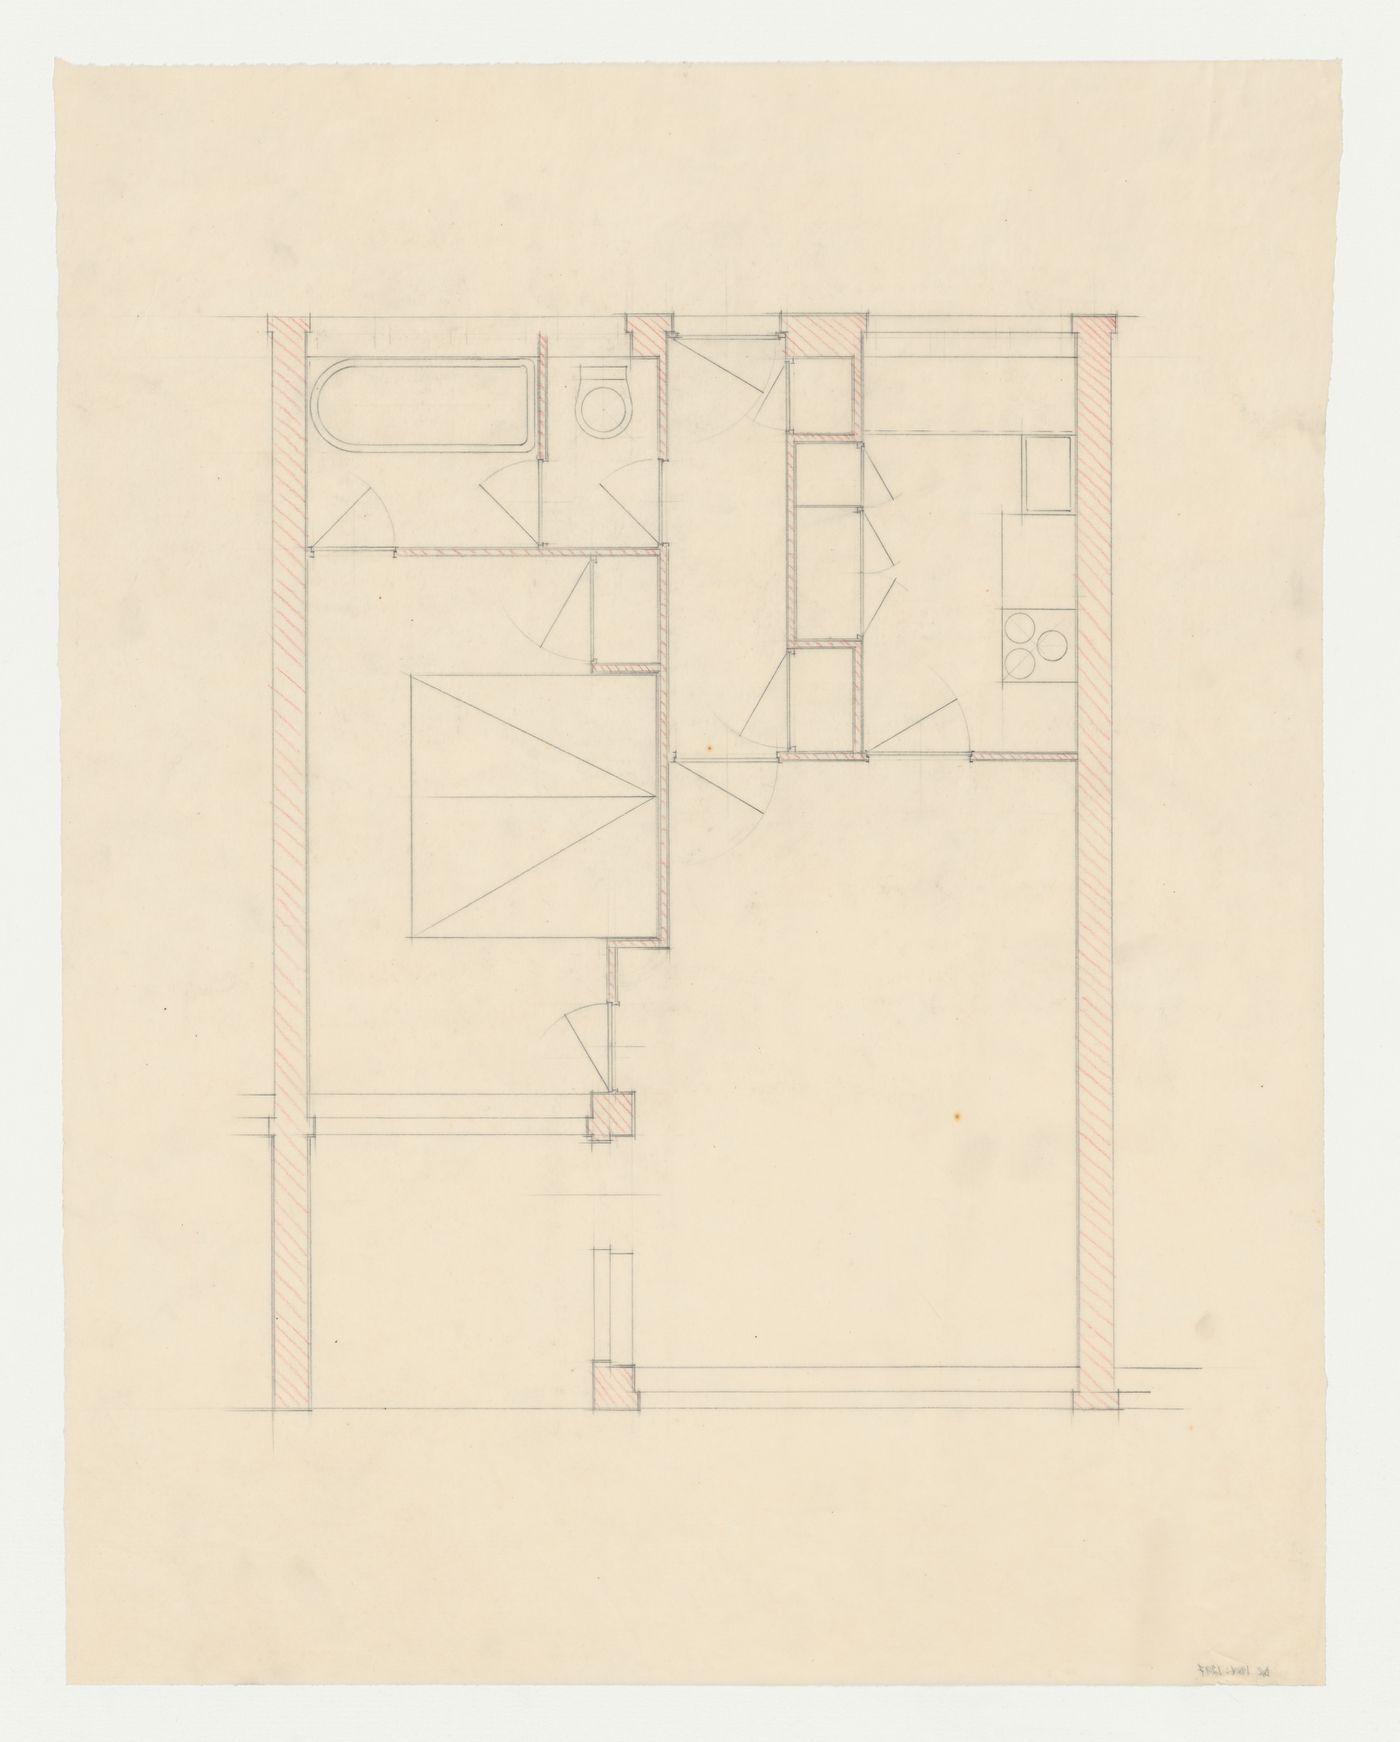 Plan for a housing unit, probably for Hellerhof Housing Estate, Frankfurt am Main, Germany